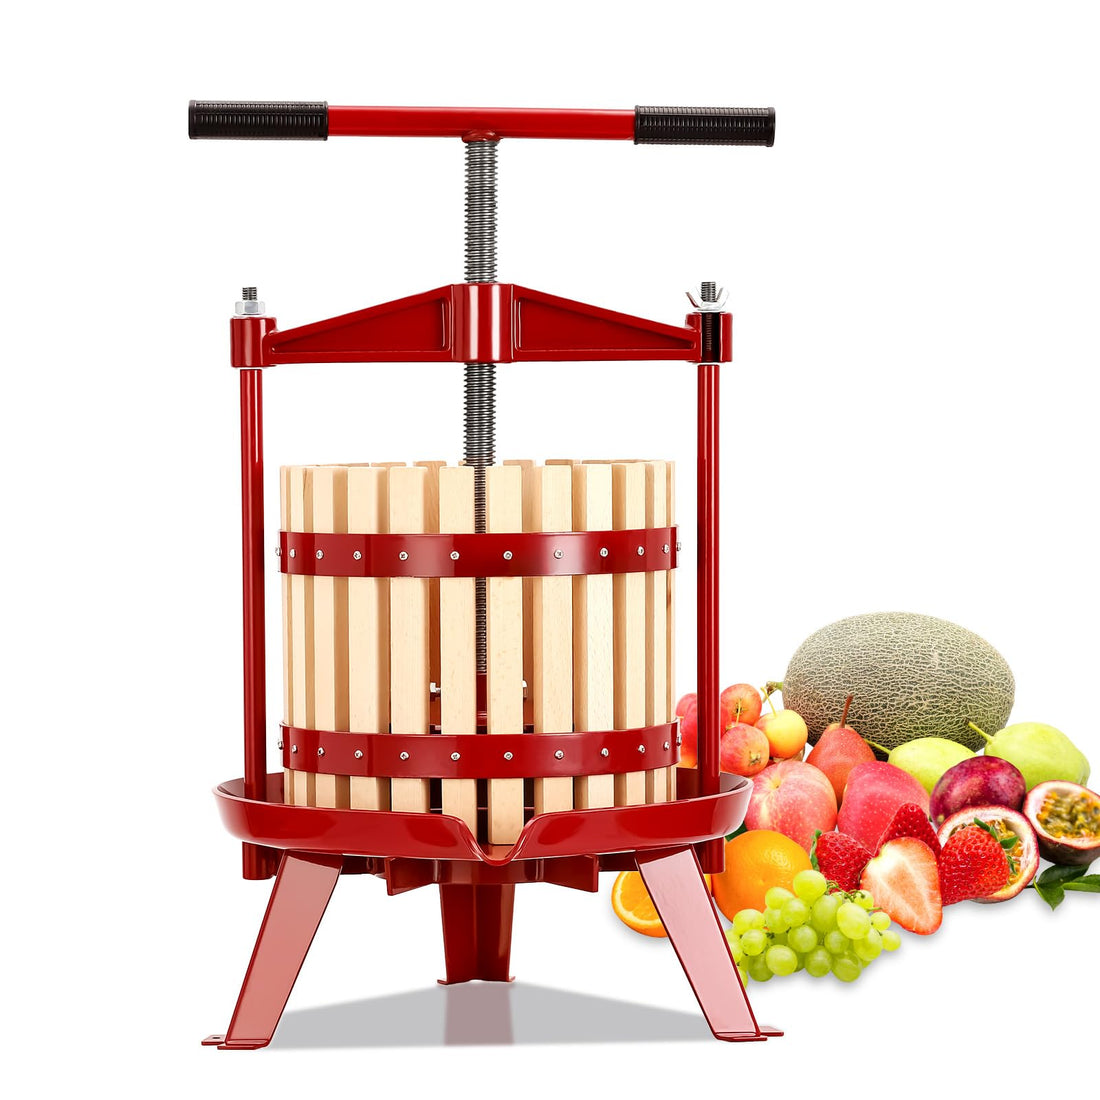 4.75 Gal Manual Fruit Press, with T-Handle, For Kitchen Use